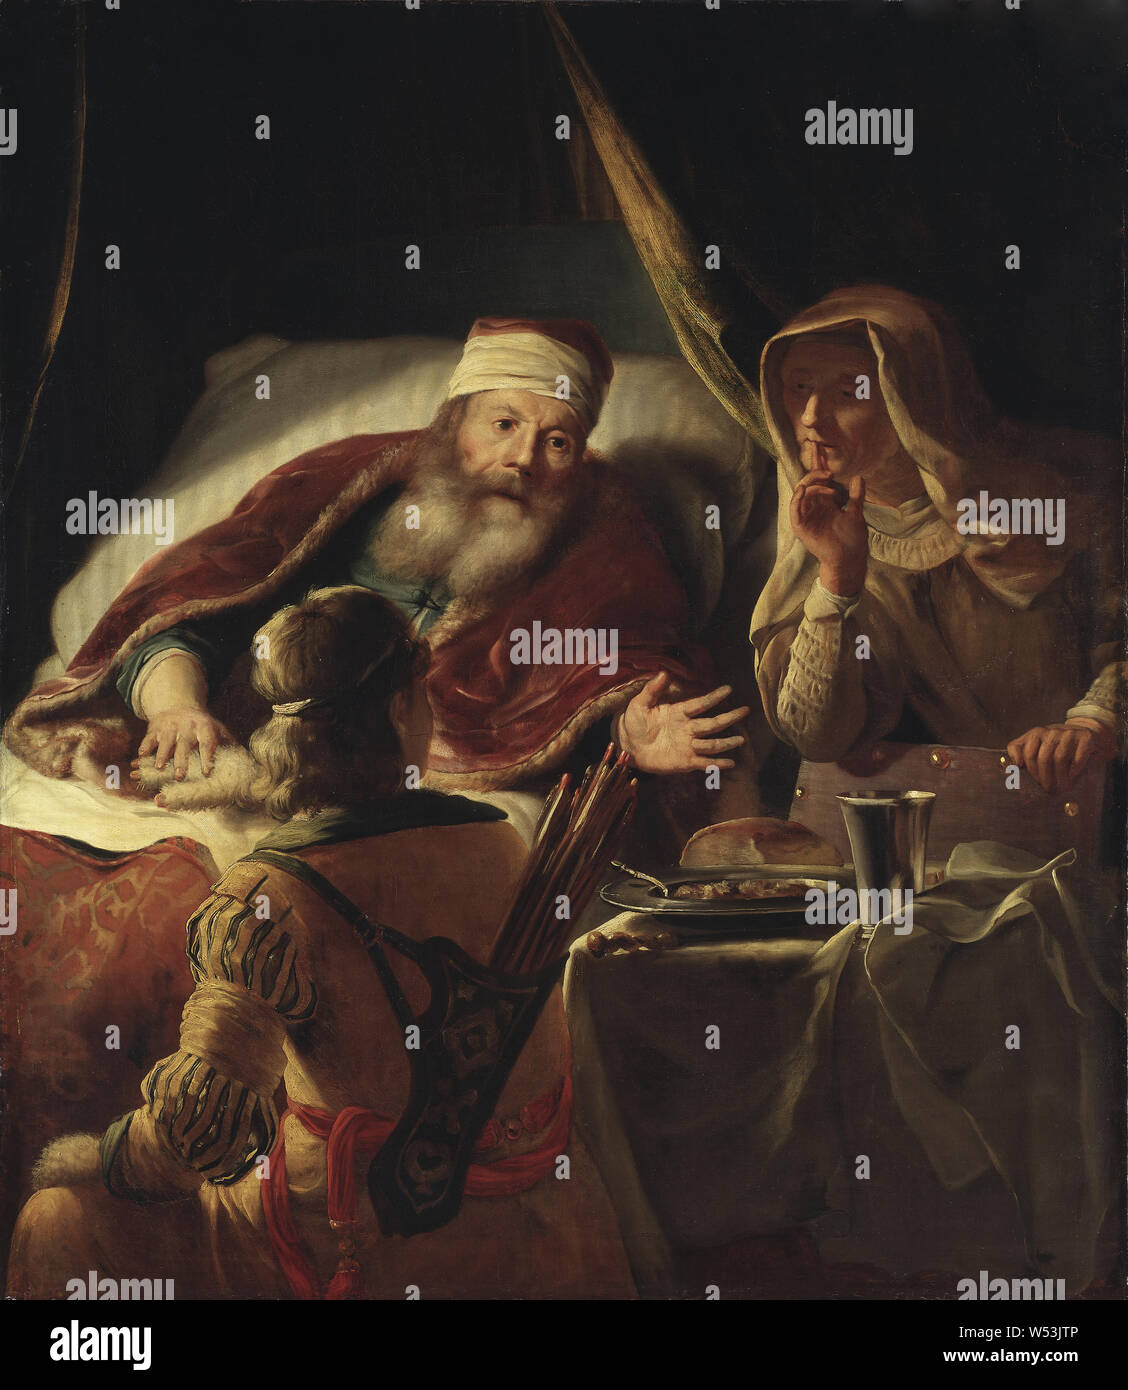 Abraham van Dijck, Isaac Blessing Jacob, Isaac bless Jacob, painting, religious art, oil on canvas, Height, 125 cm (49.2 inches), Width, 108 cm (42.5 inches) Stock Photo